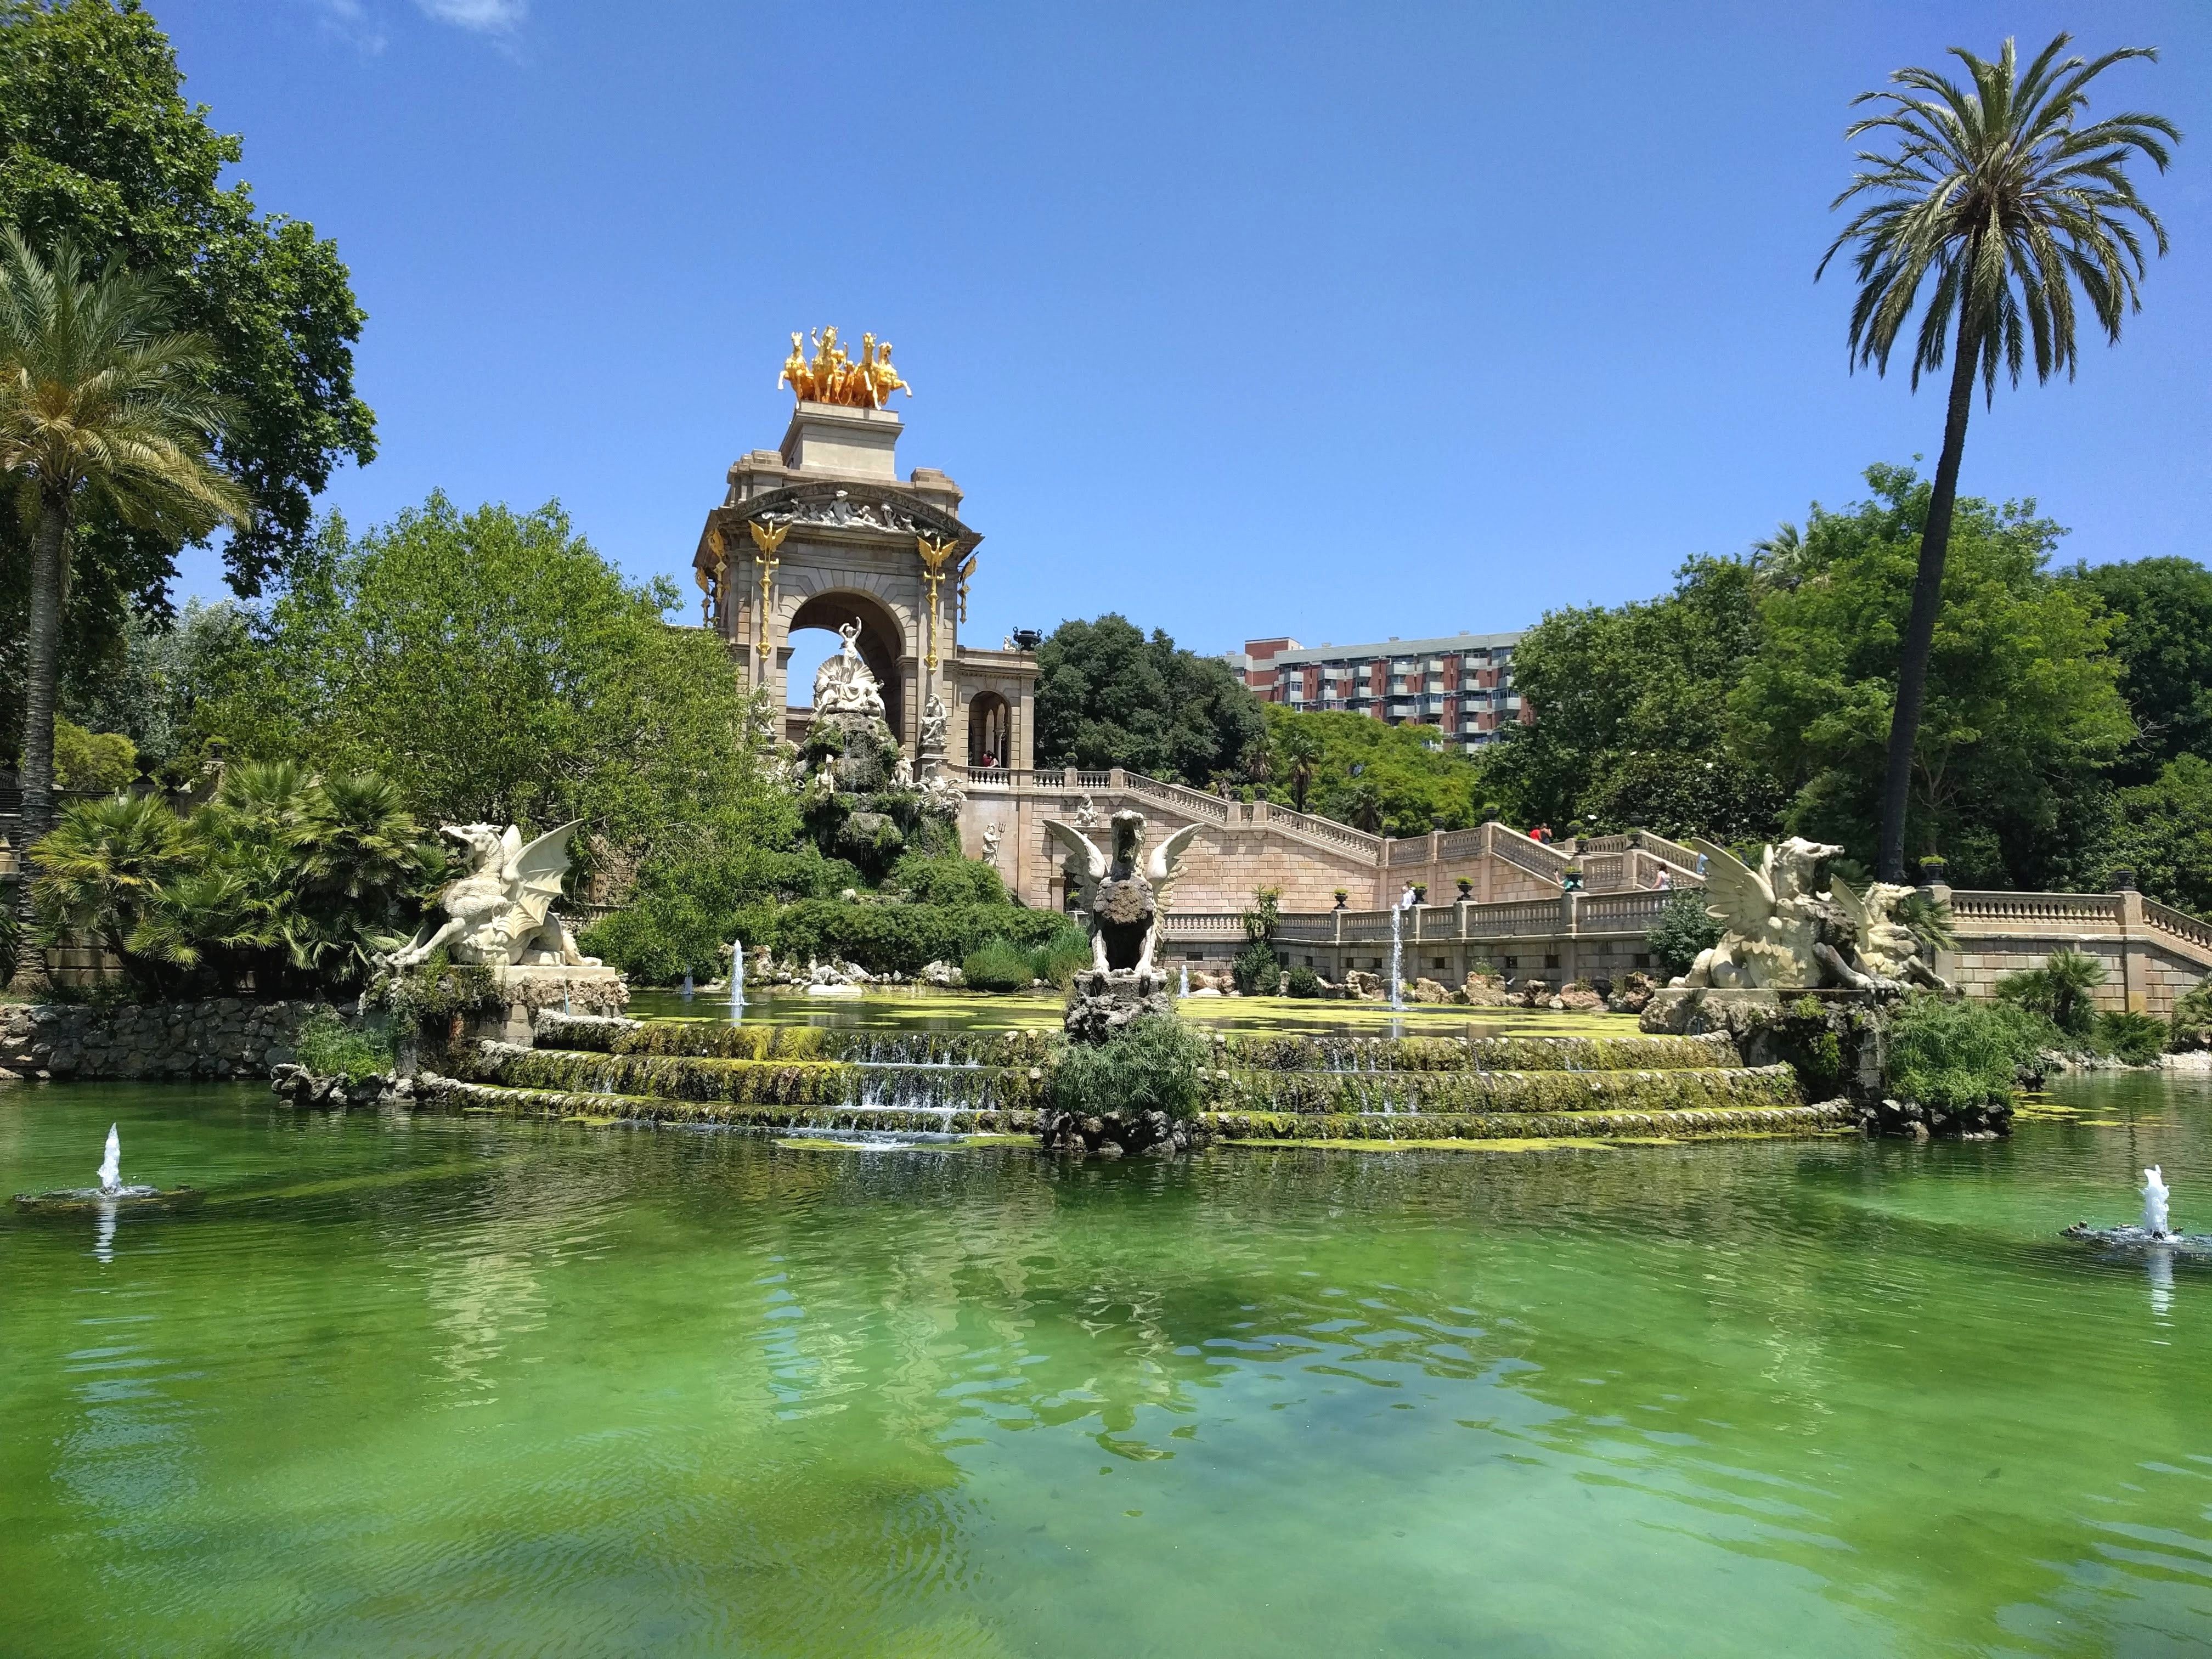 Caption: A photo of the Cascada Monumental Fountain and greenish lake in front of it, with several lush green trees around it. (Local Guide @MoniDi)